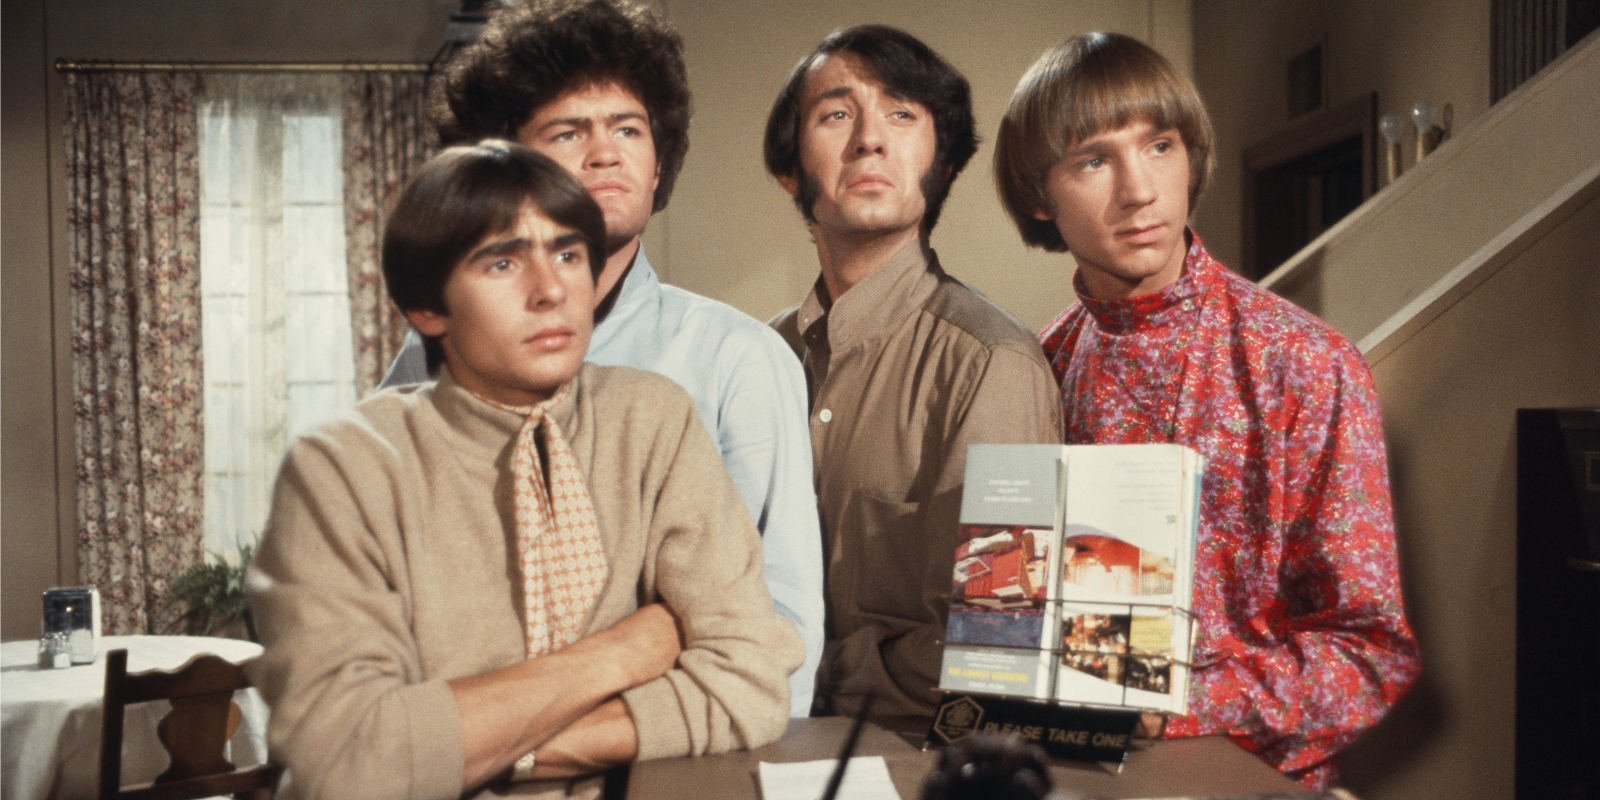 Davy Jones, Micky Dolenz, Mike Nesmith, and Peter Tork of the television series 'The Monkees.'